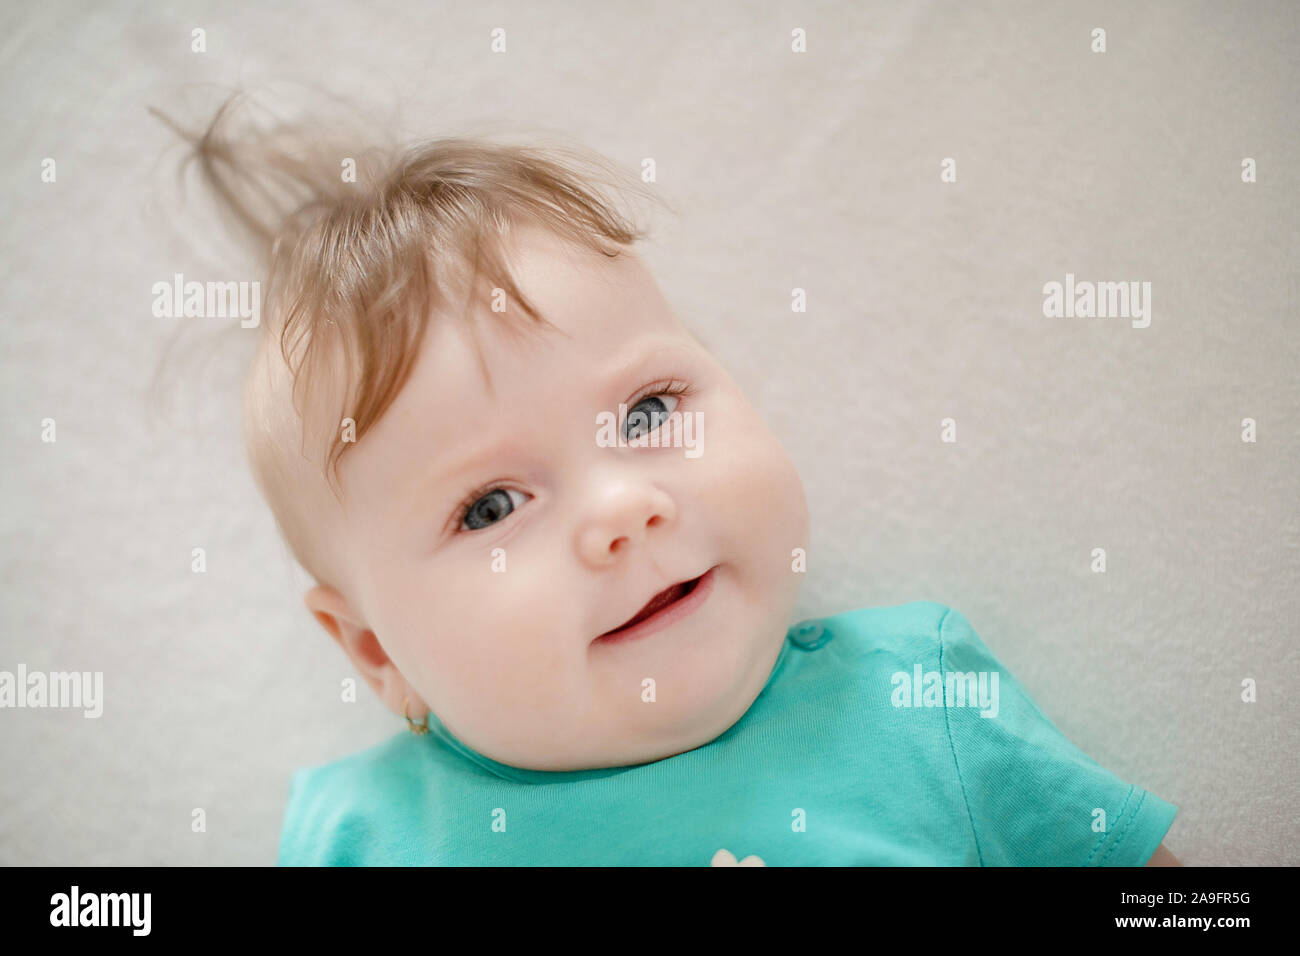 Portrait of adorable baby girl with blue eyes and cute hair looking at the camera calmly with a smile; cute baby facial expressions and learning steps Stock Photo